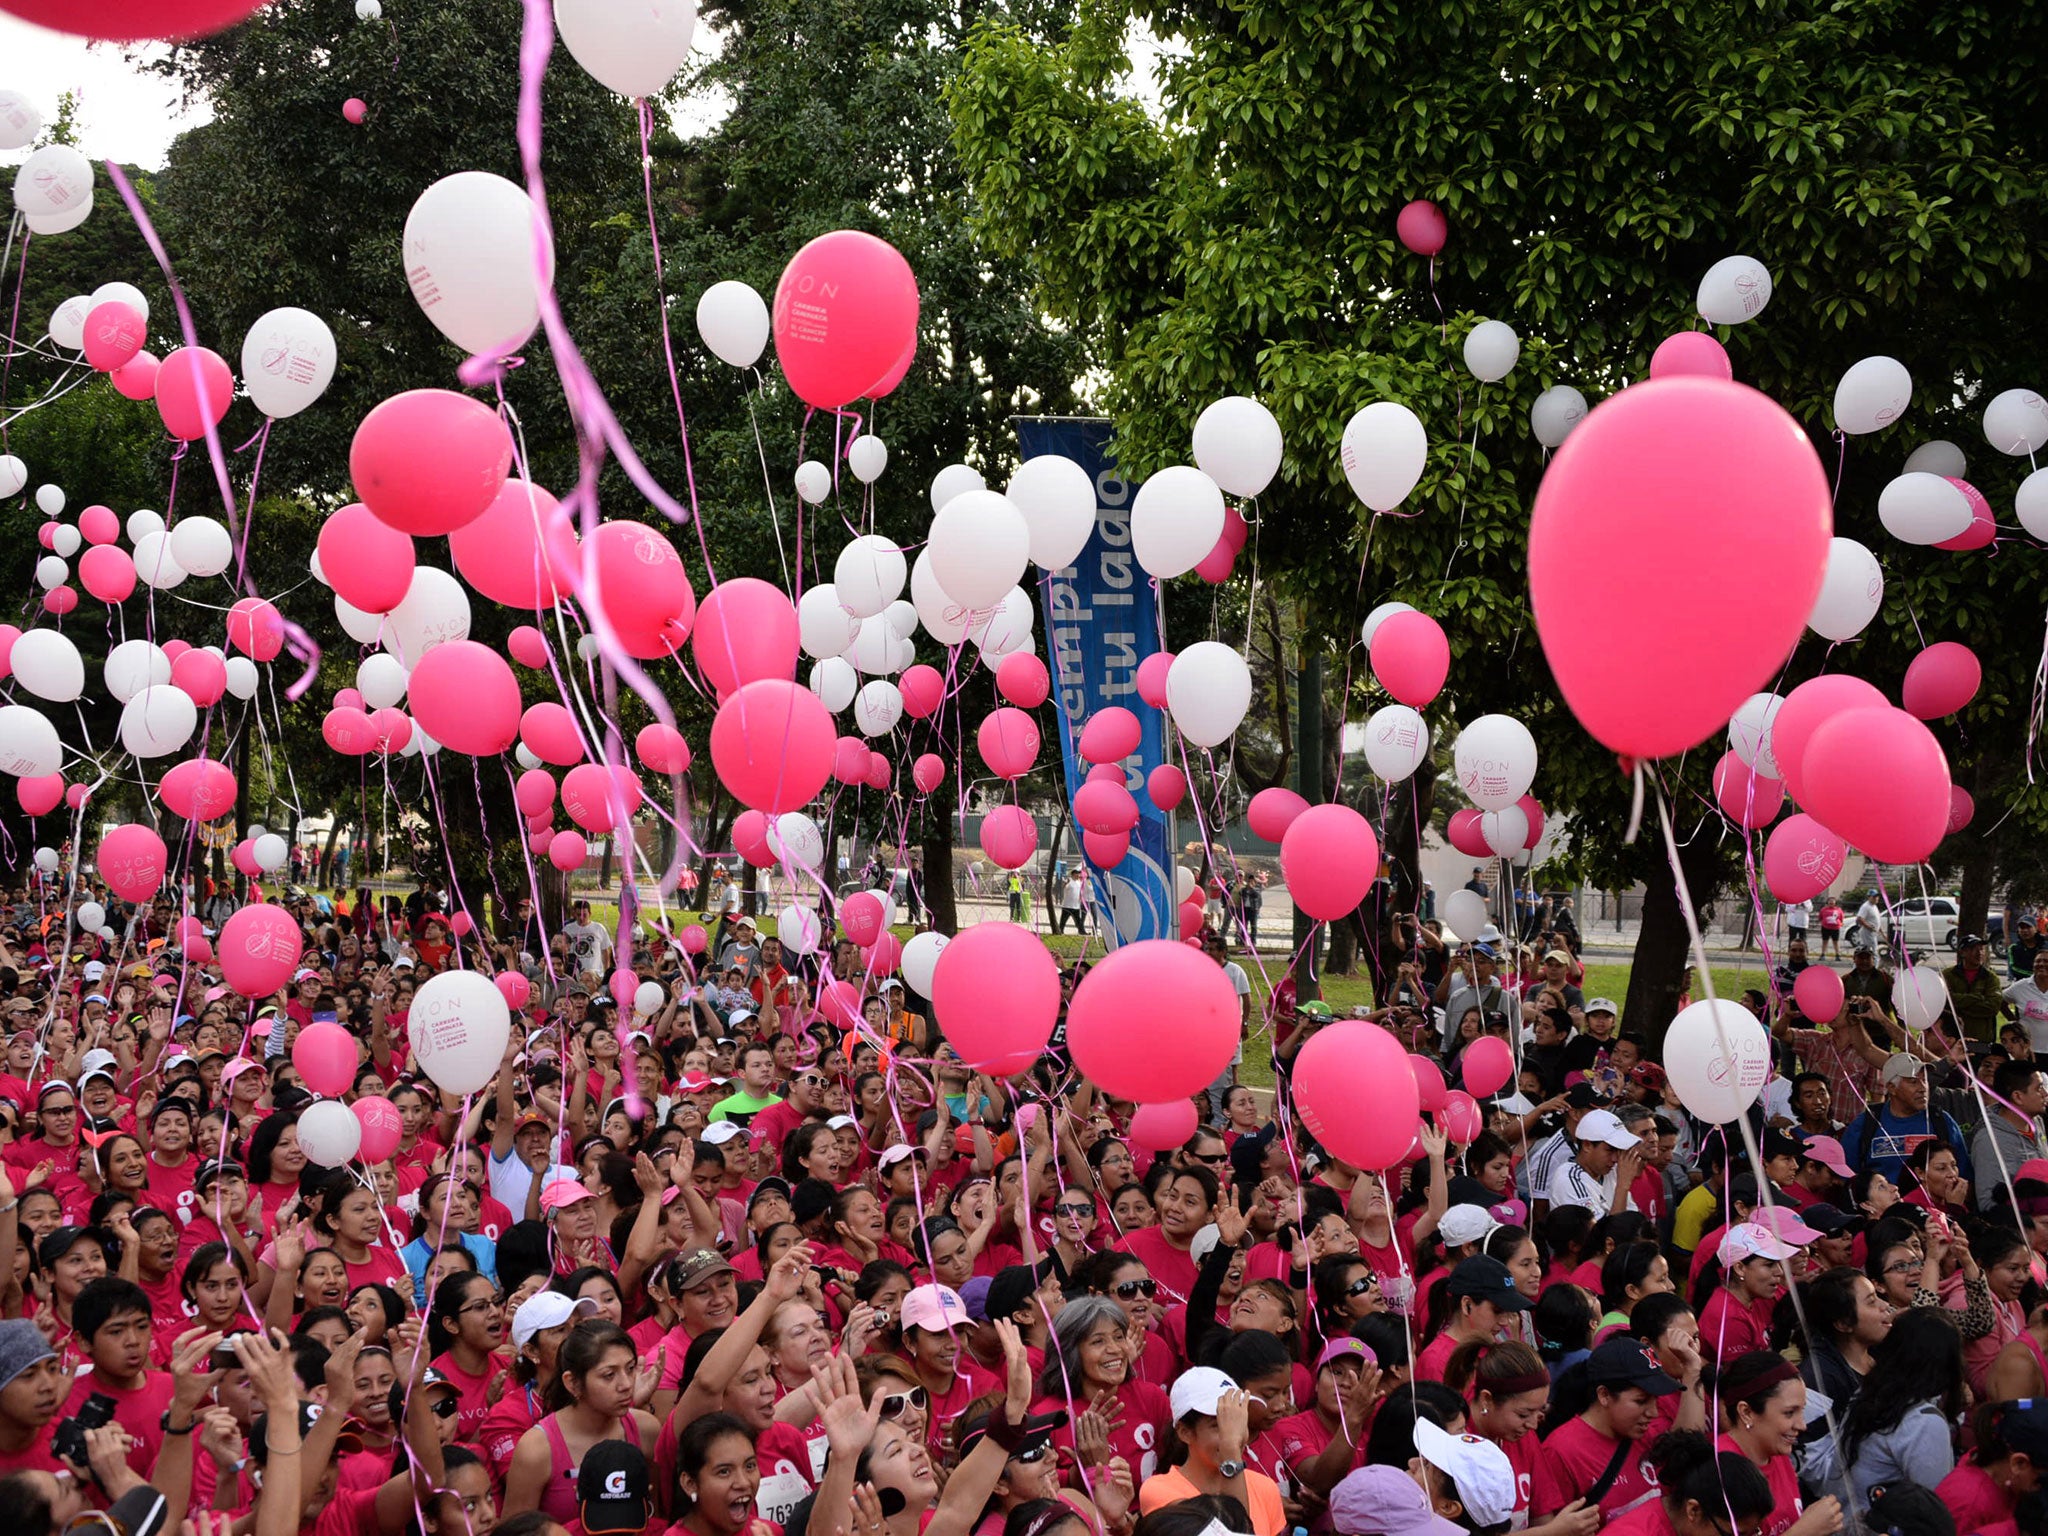 Women in Guatemala City take part in a run to raise awareness of breast cancer